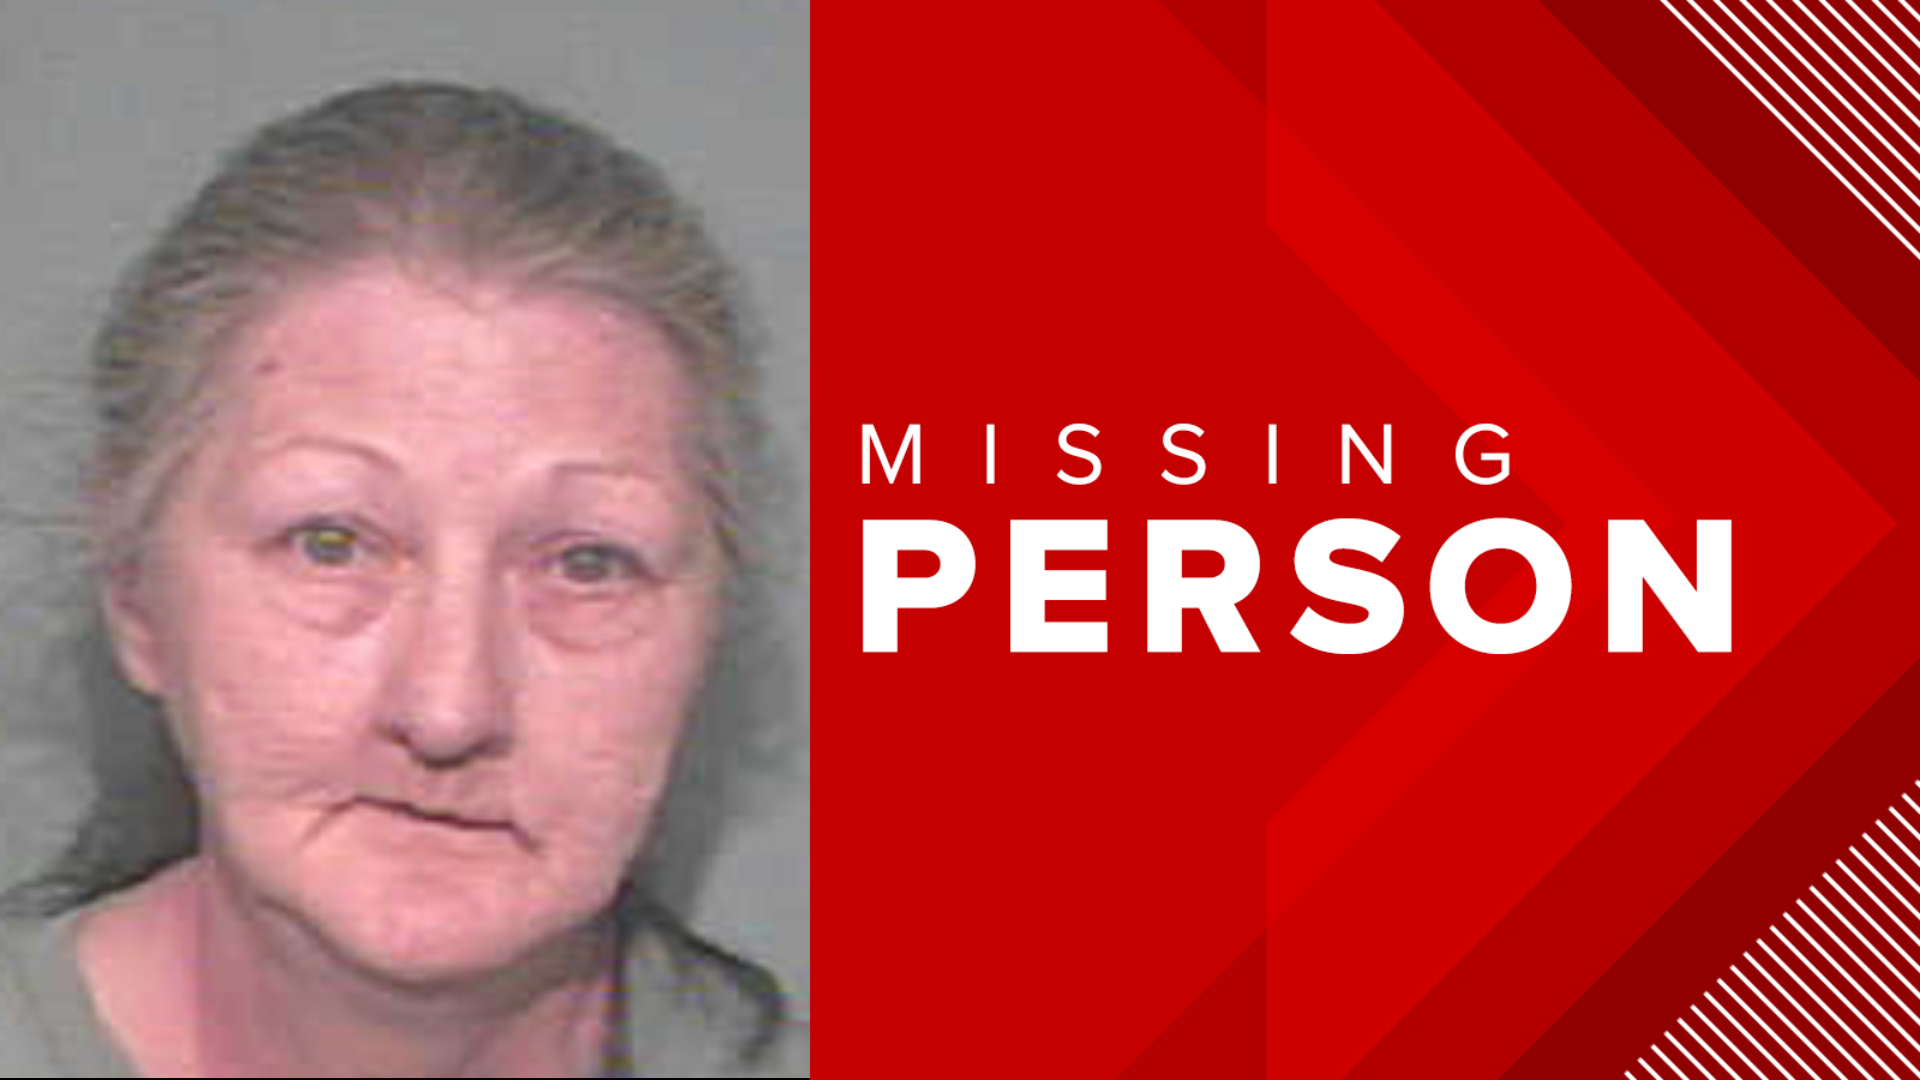 Police say 73-year-old Nancy Boskovic was last seen Sunday evening at the residential care facility where she lives.